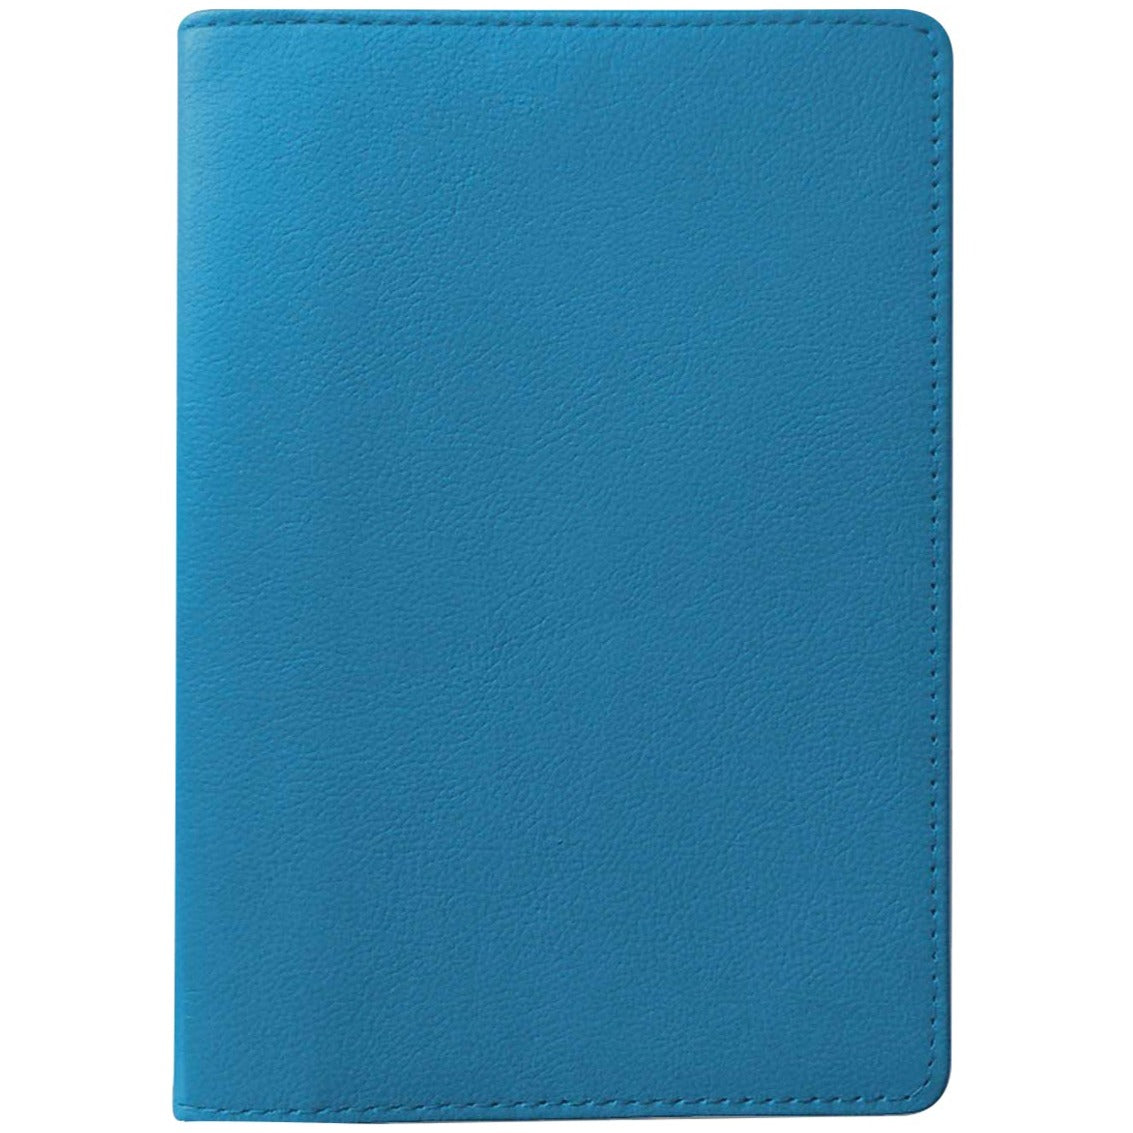 Leathersmith of London Mayfair Capri Blue Wallet with Refill-Notebook-Goviers